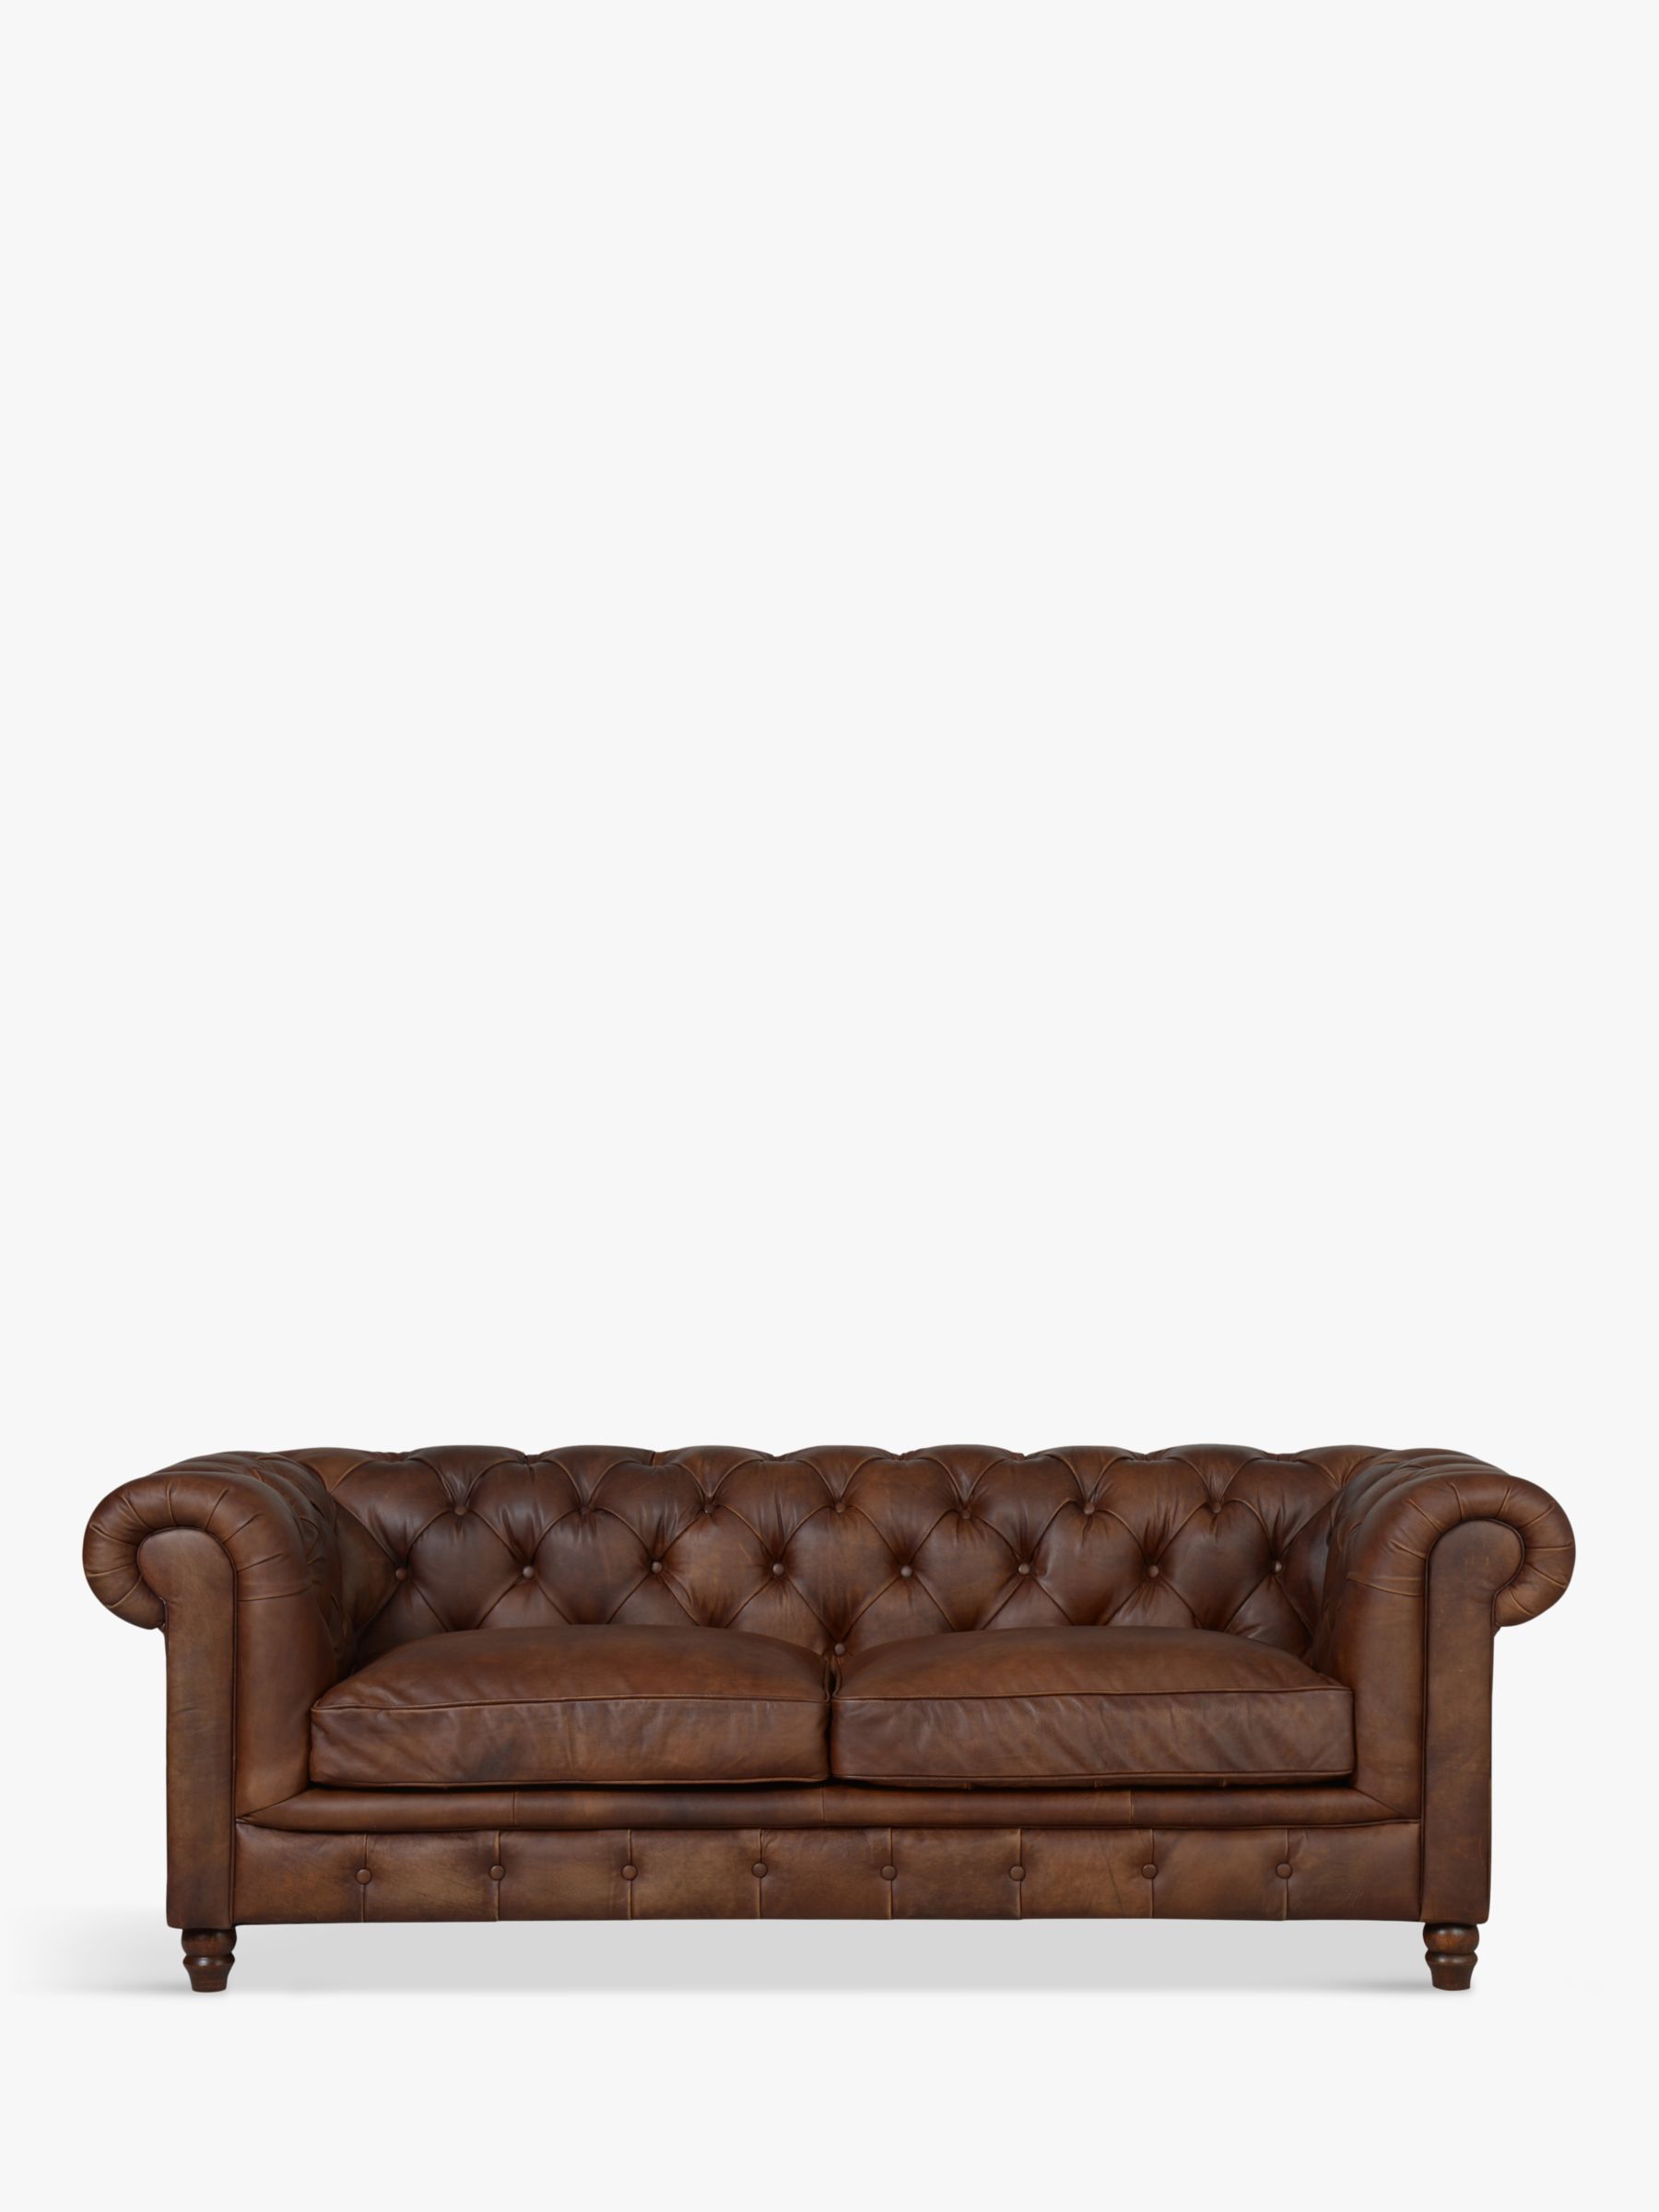 Earle Range, Halo Earle Chesterfield Medium 2 Seater Leather Sofa, Antique Whisky